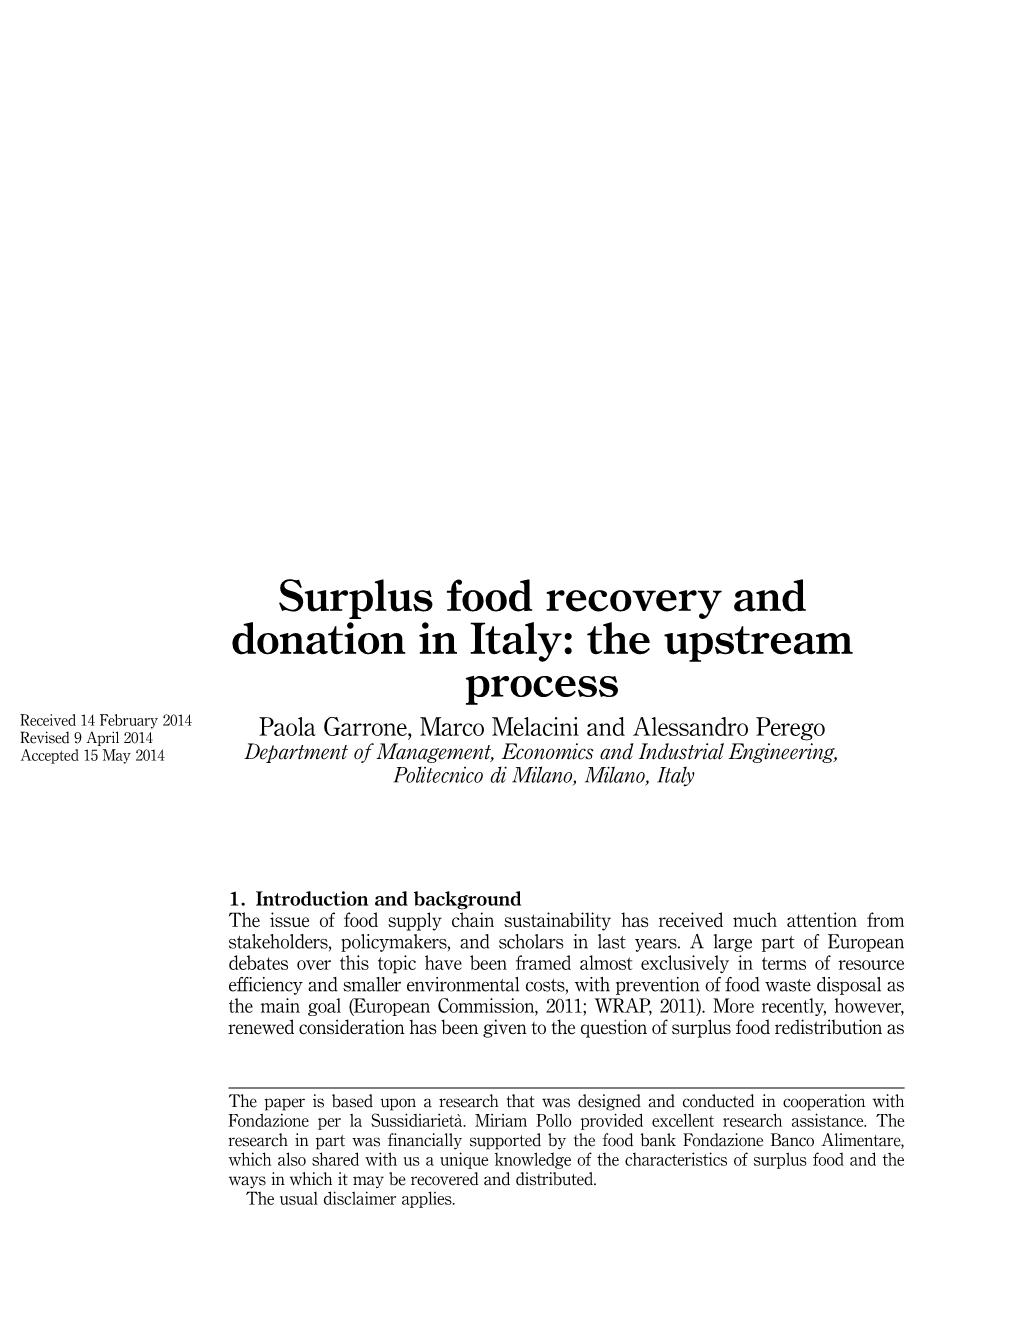 Surplus Food Recovery and Donation in Italy